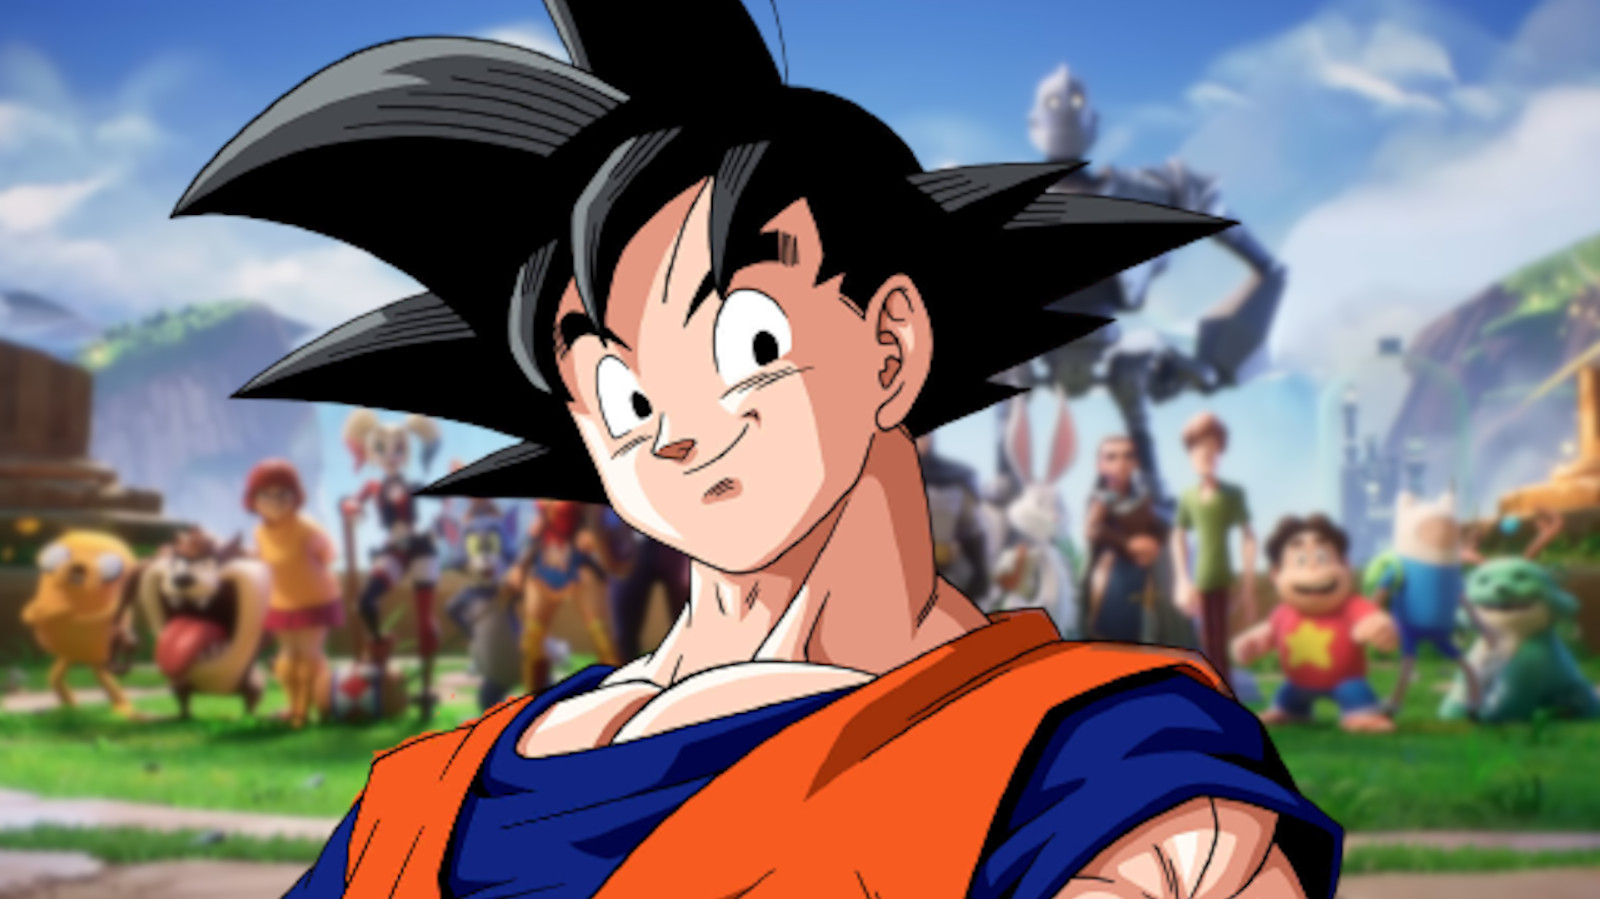 Dragon Ball Z reference in MultiVersus sparks Goku DLC fighter rumors -  Dexerto